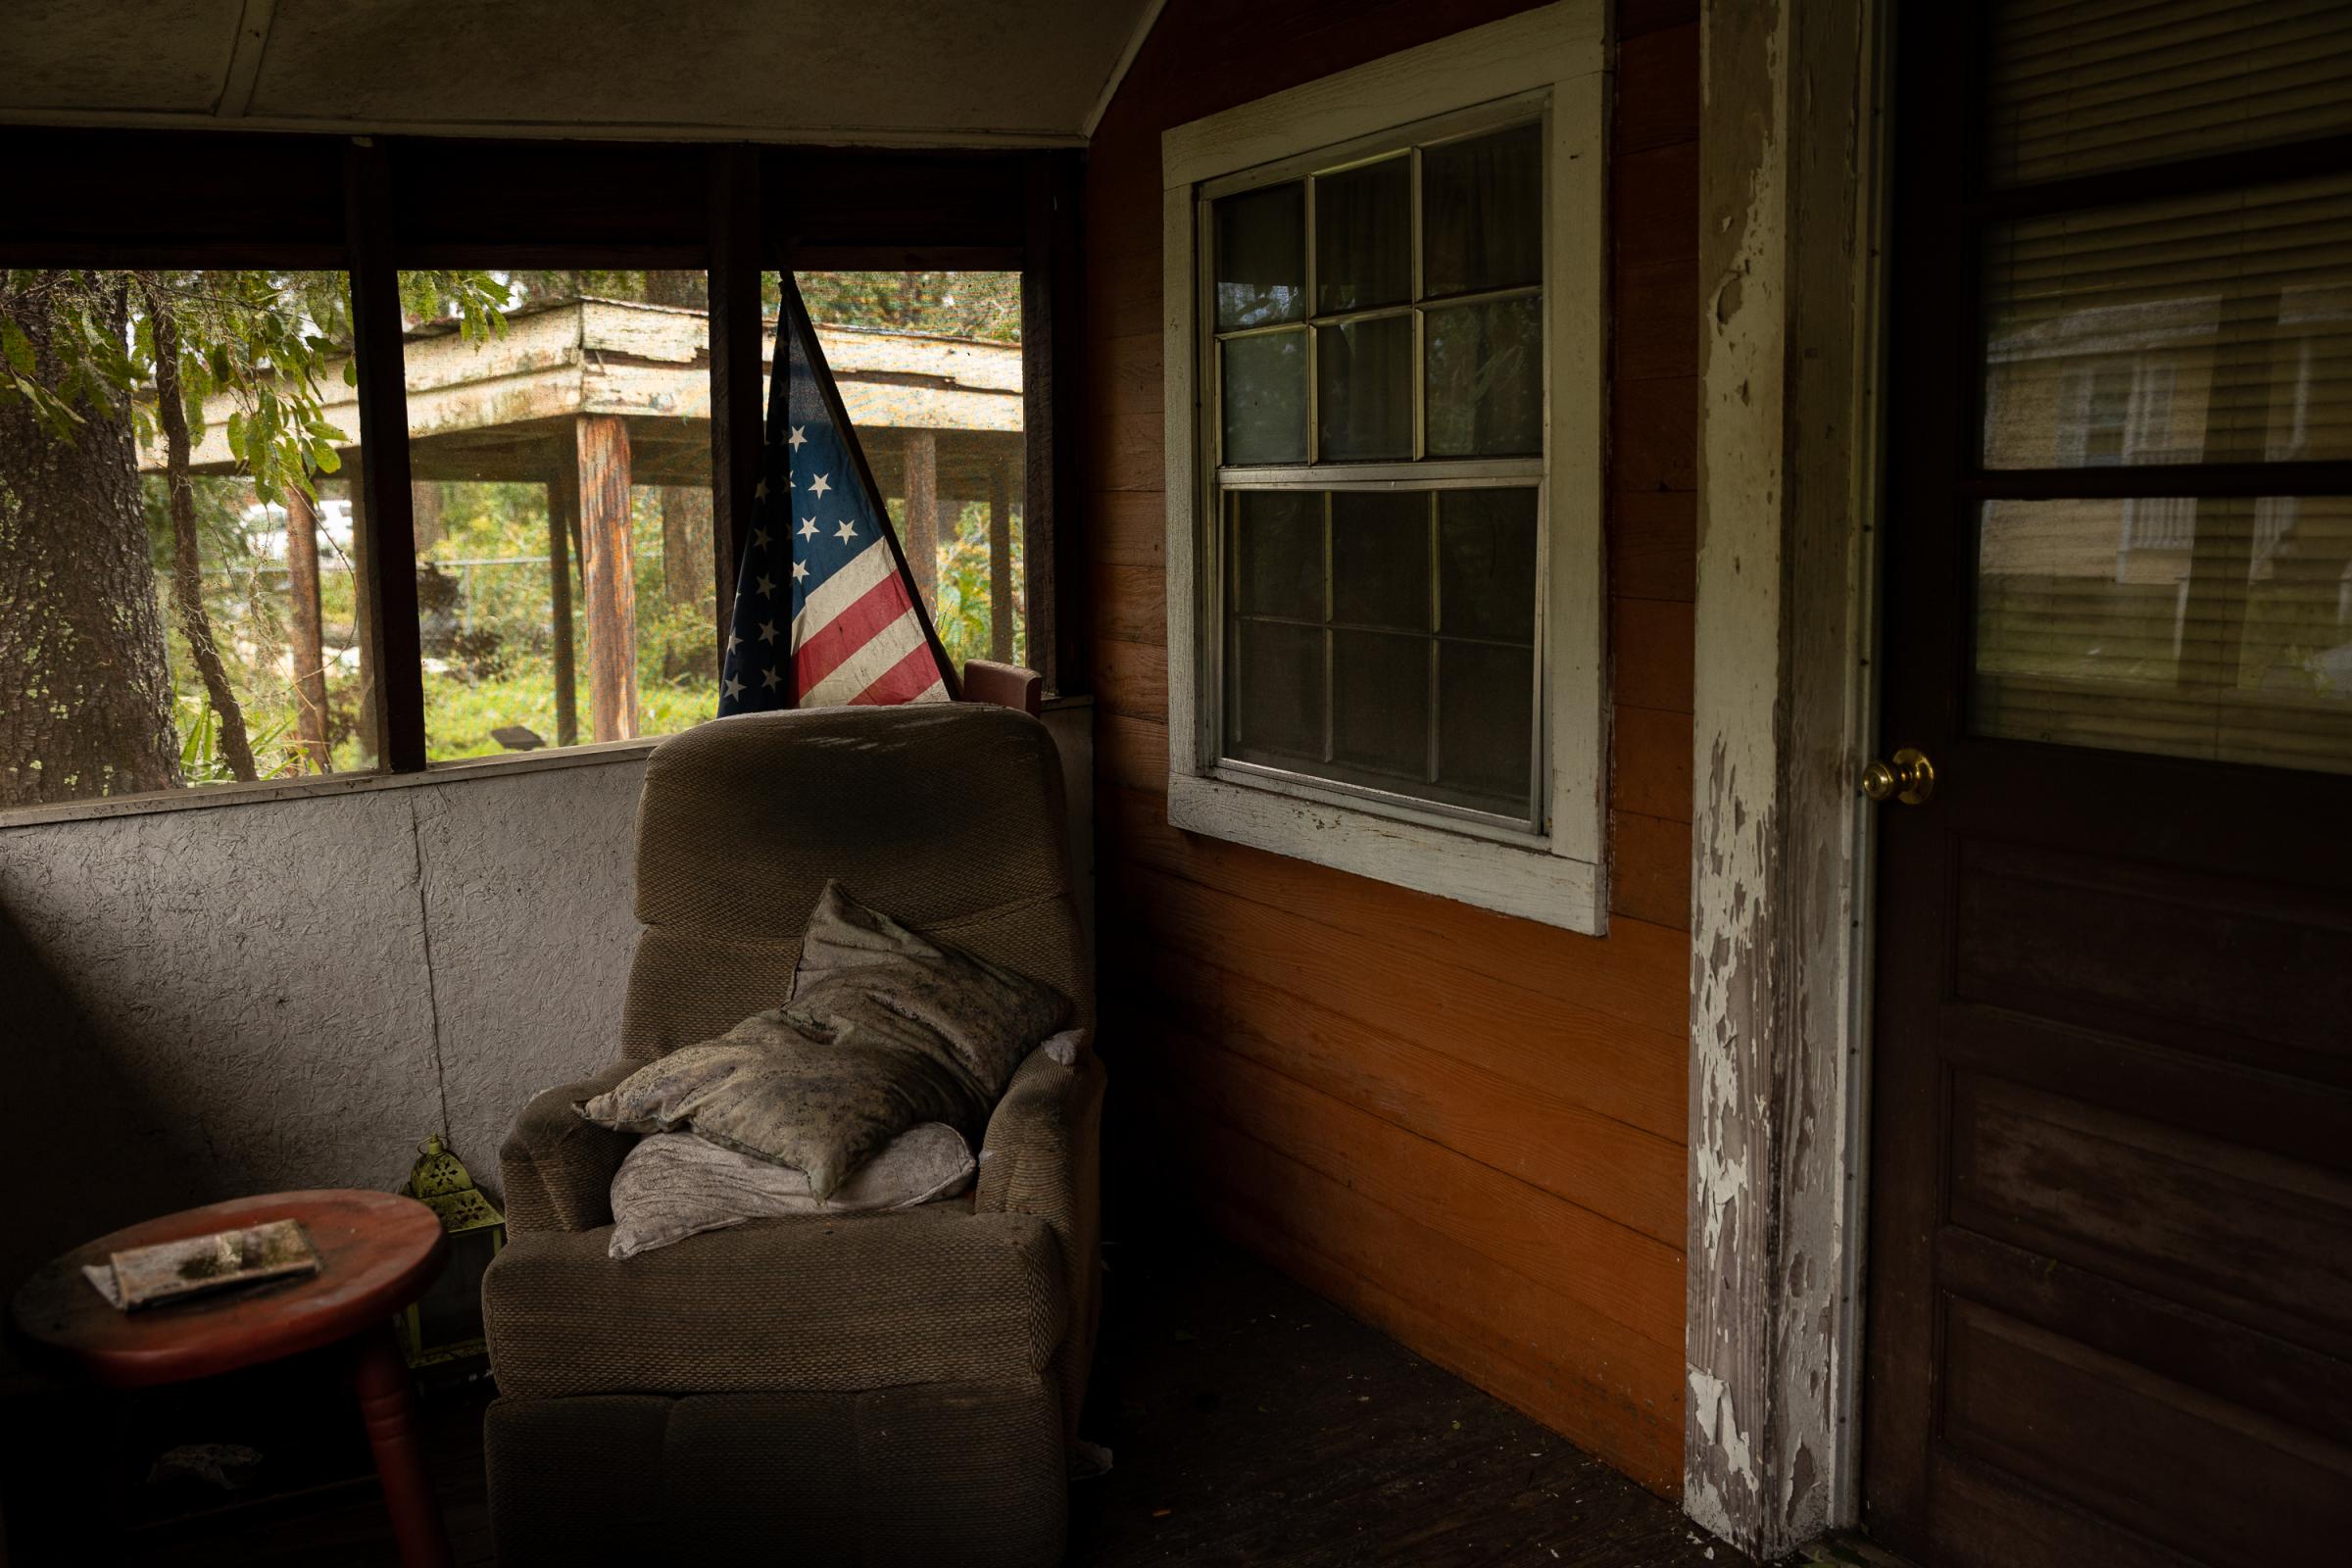 Hurricane Idalia hits Florida - An American flag is seen in a front porch of a house...